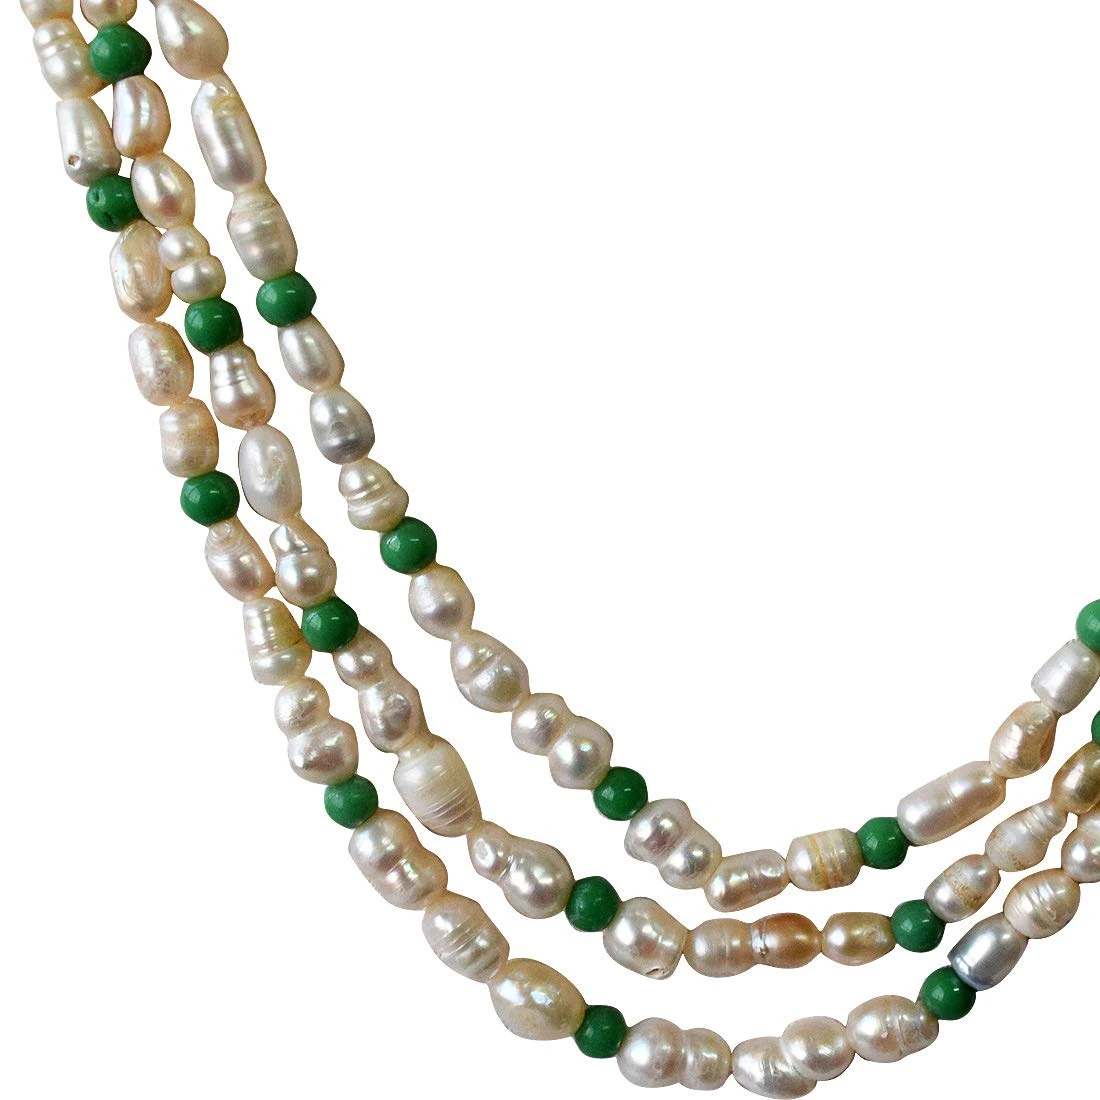 3 Line Freshwater Real Natural Pearl and Green Beads Necklace for Women (SN962)